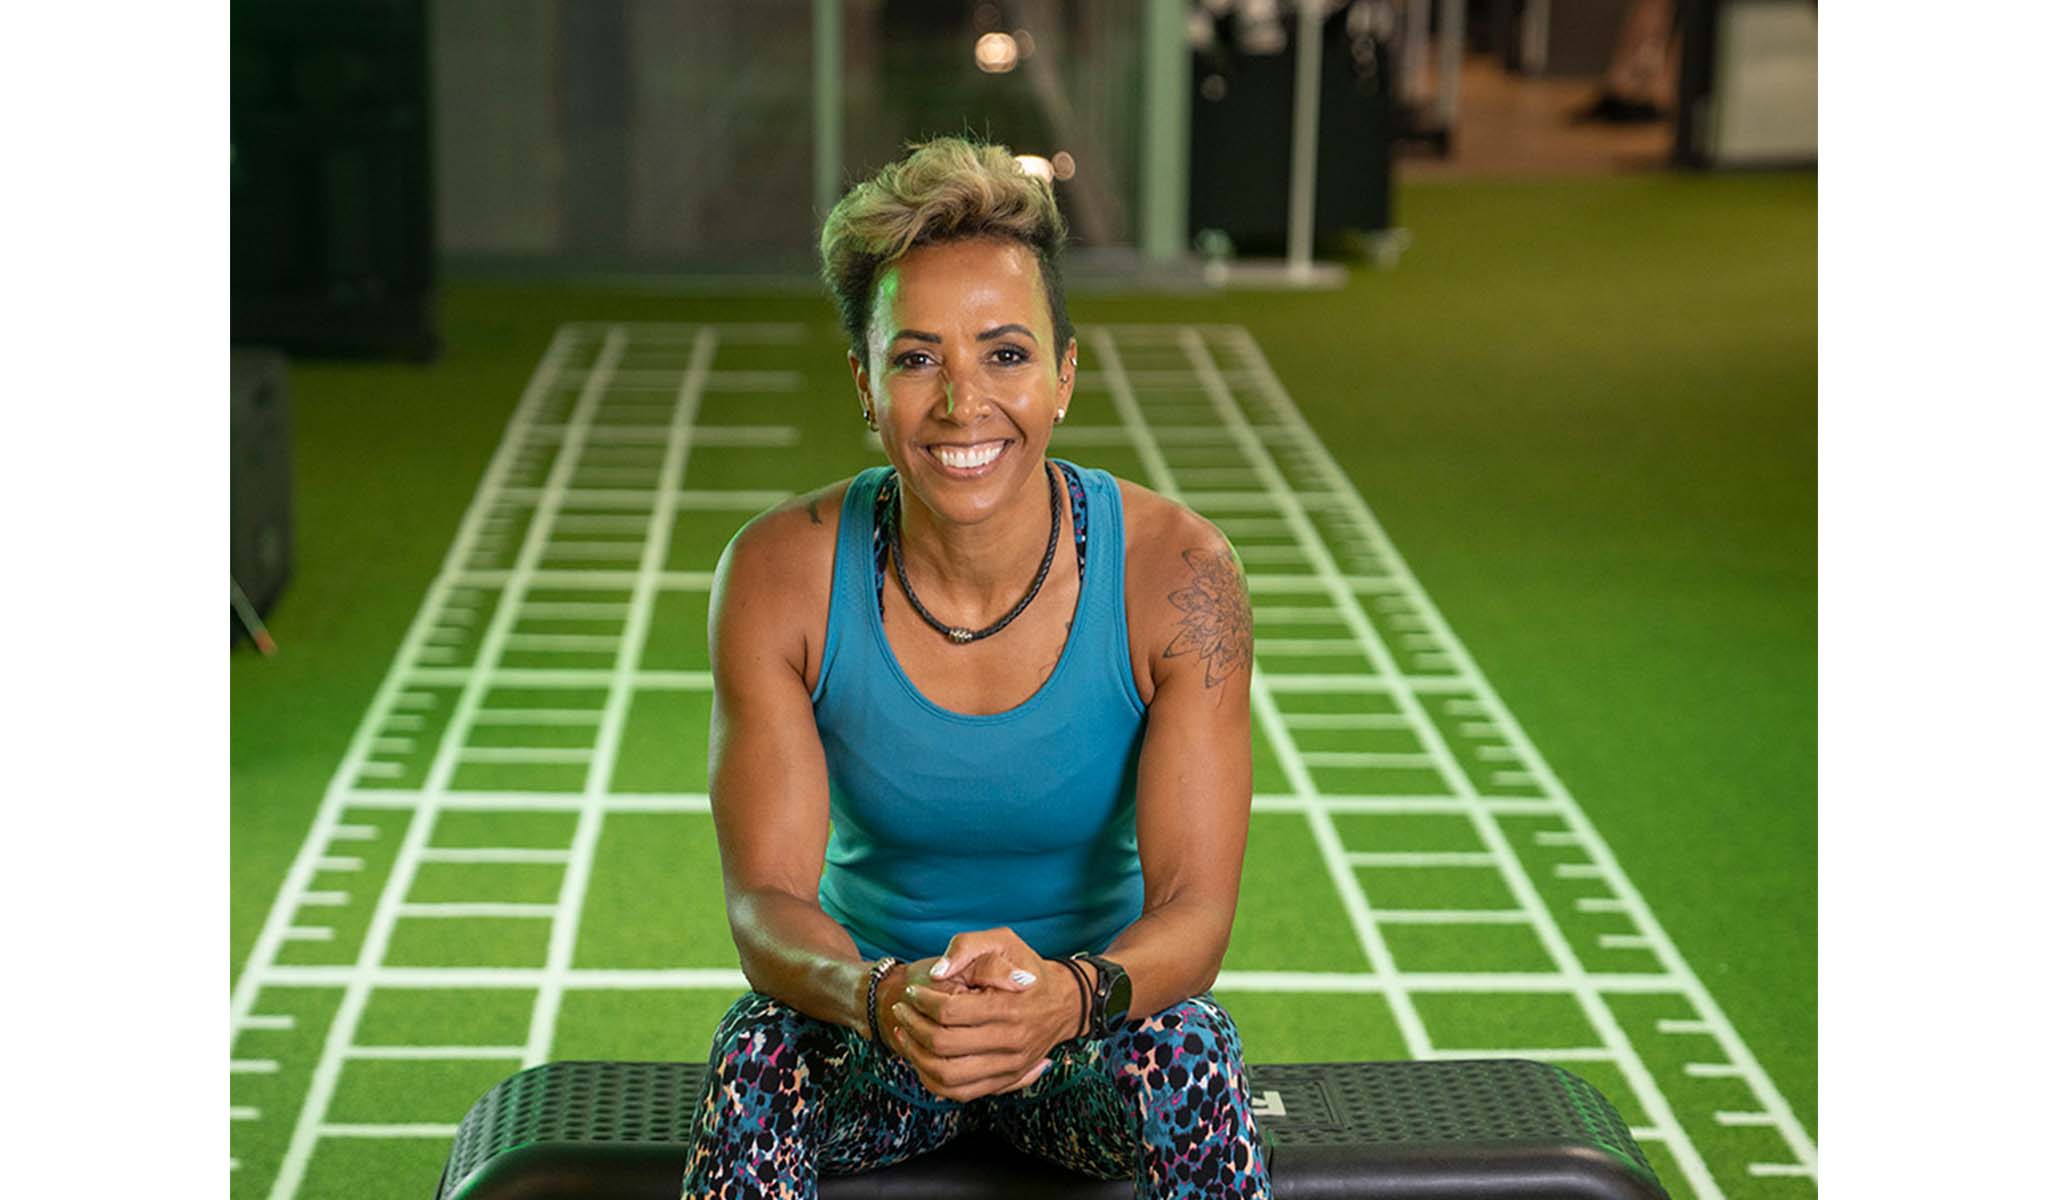 Dame kelly holmes launches new campaign to boost mental + physical health